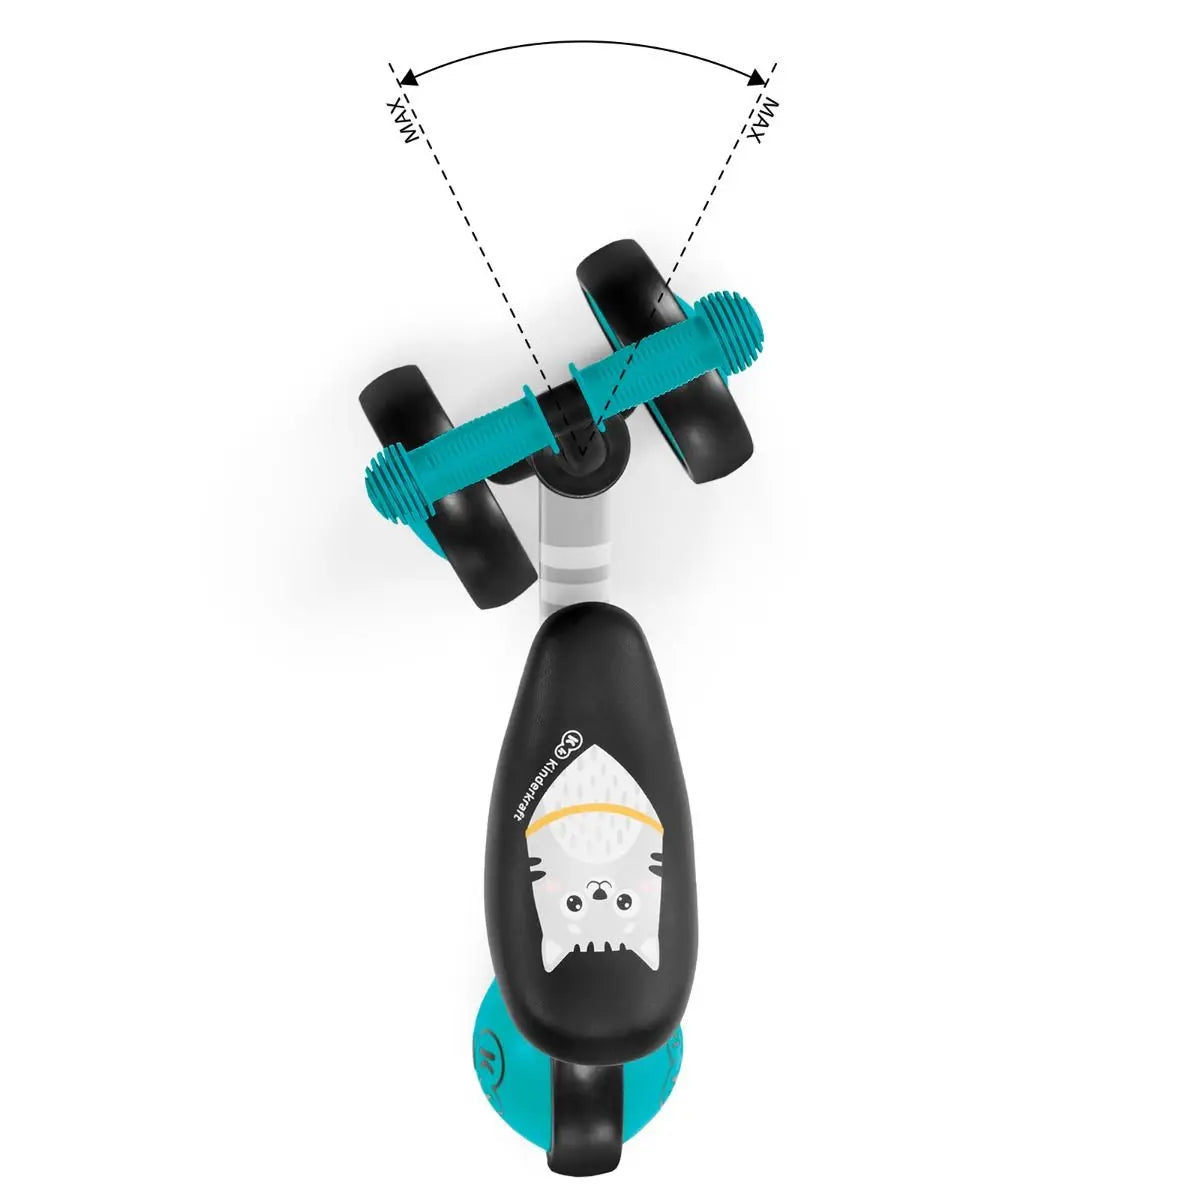 A turquoise balance bike for toddlers featuring a kitten print, adjustable saddle, rubber non-slip handles, and a durable steel frame. Ideal for teaching balance and safe play.